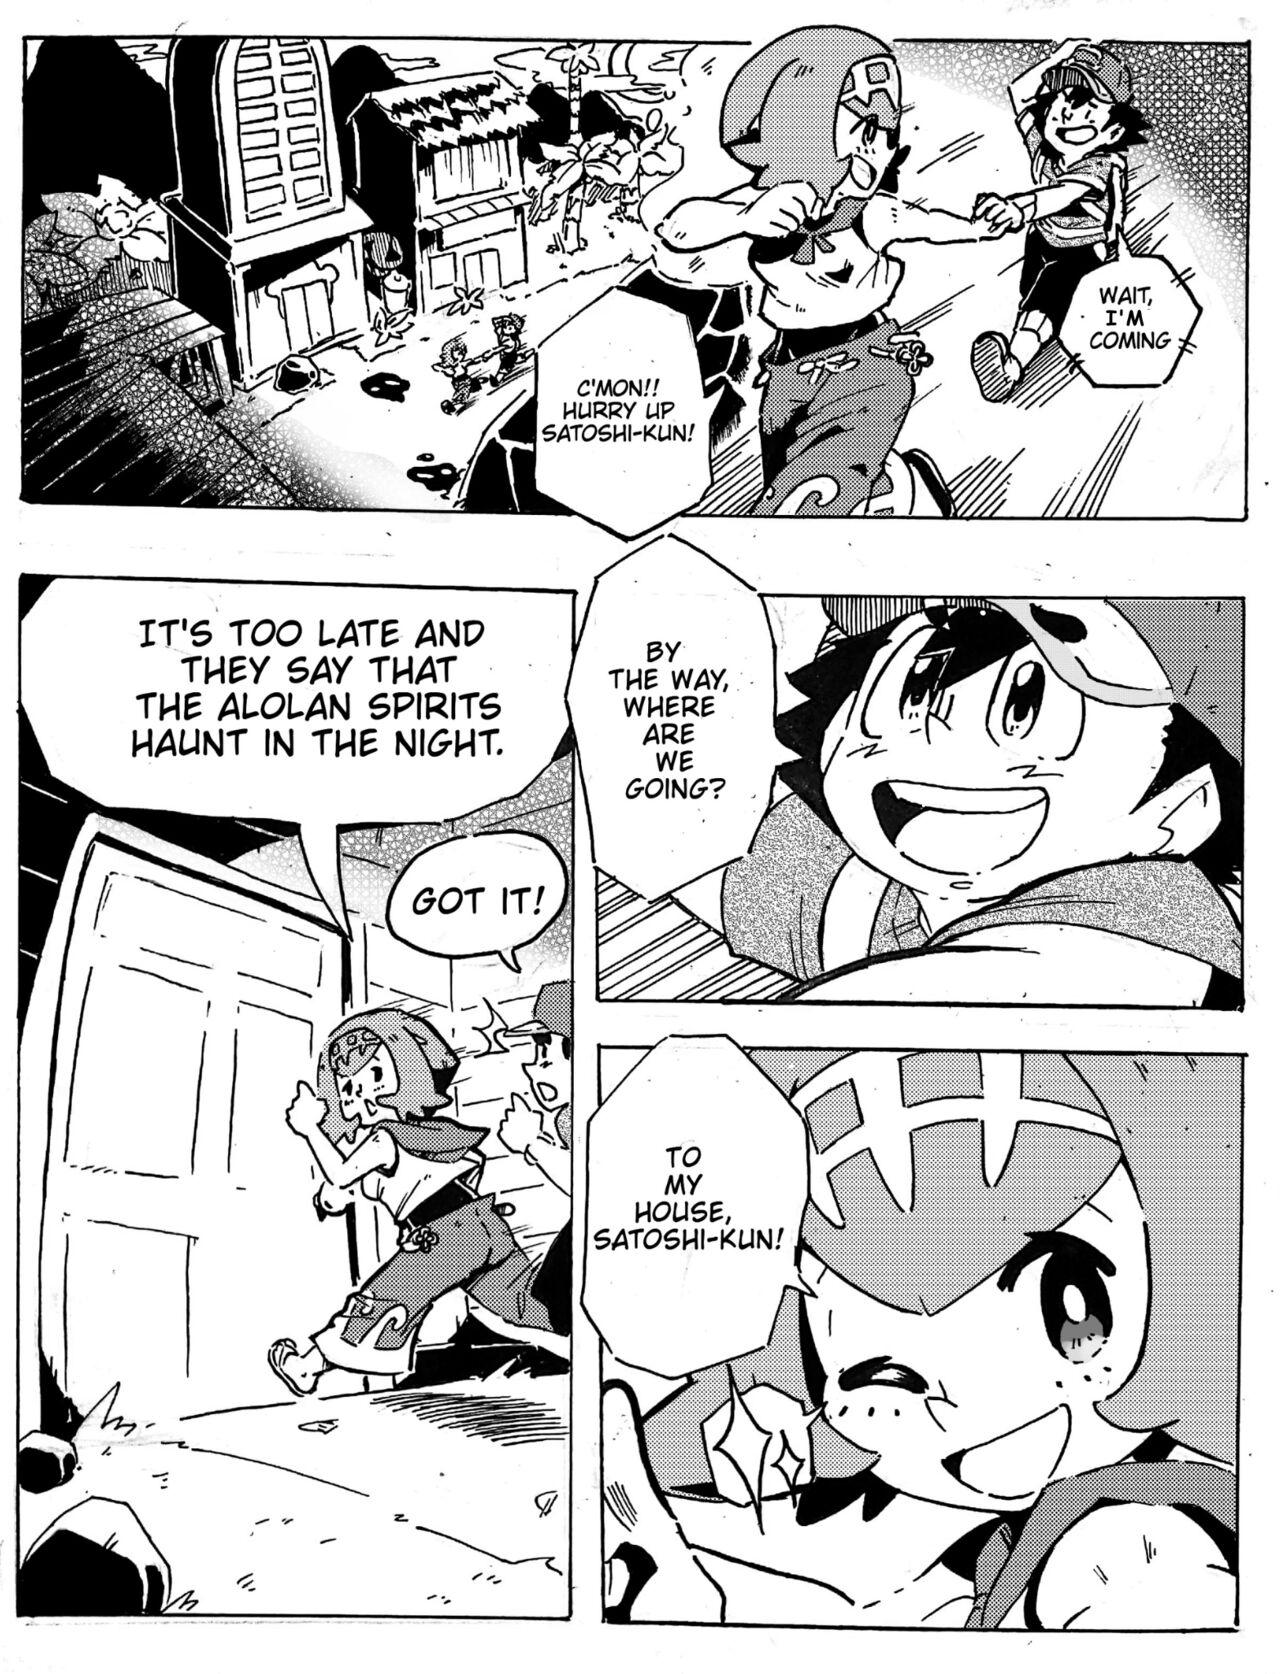 Redhead Alola's Family Moment ♡ - Pokemon | pocket monsters Gay Solo - Page 4